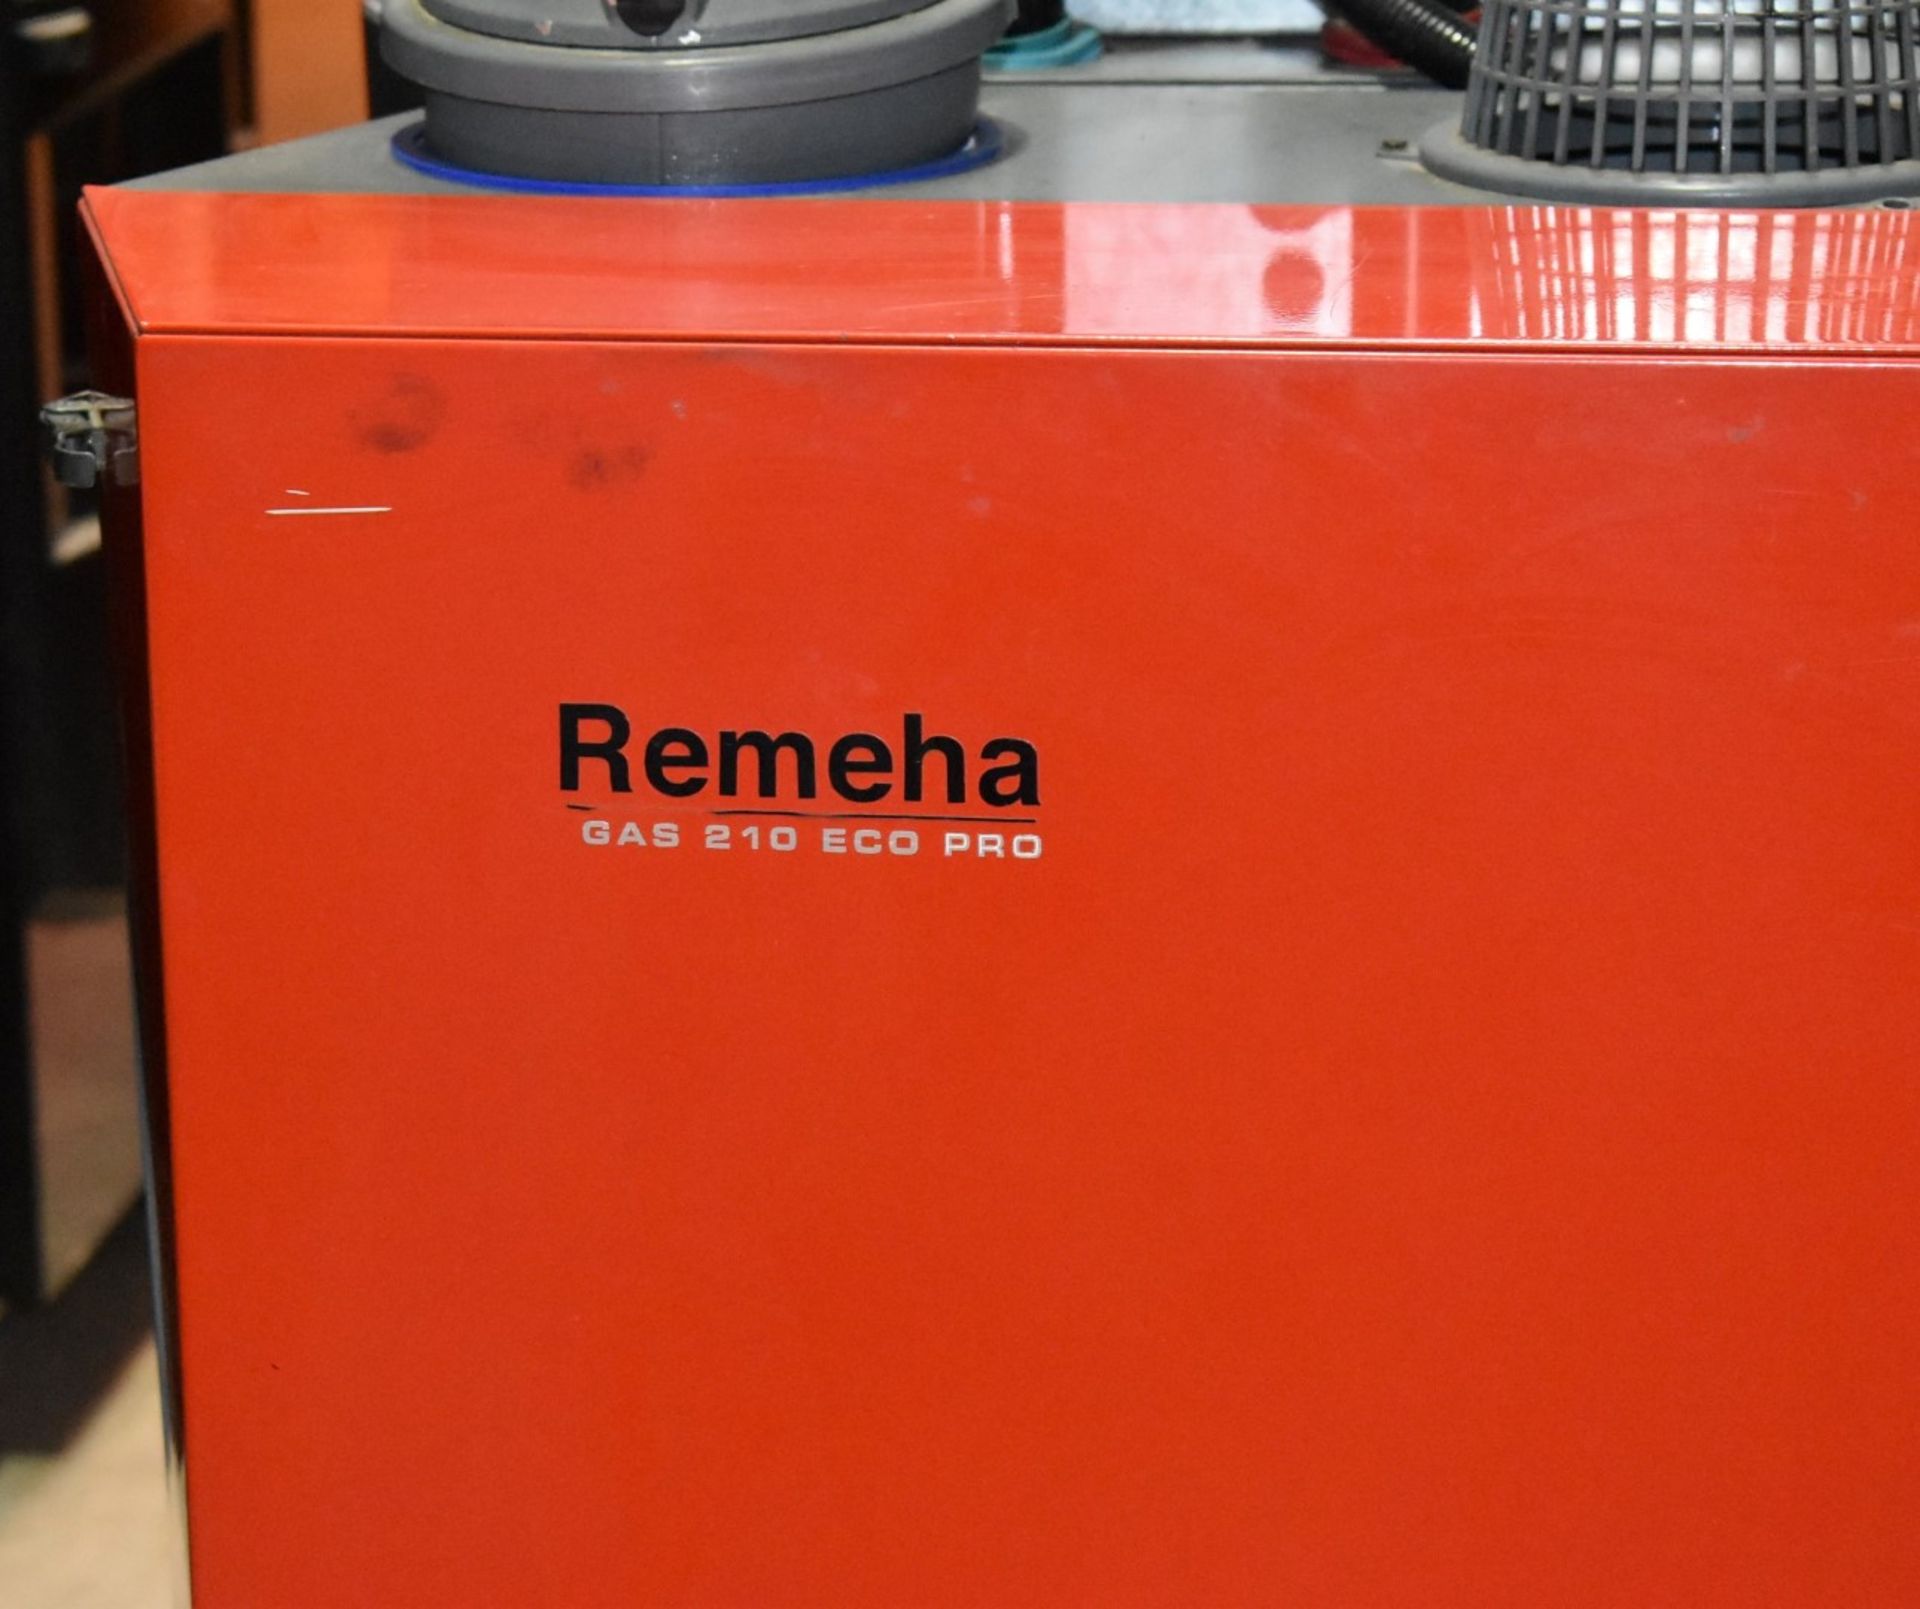 1 x Brohag Remeha Gas 210 Eco Pro Floor Standing Commercial Boiler - Ref: WH2-140 H7B - CL711 - - Image 11 of 11